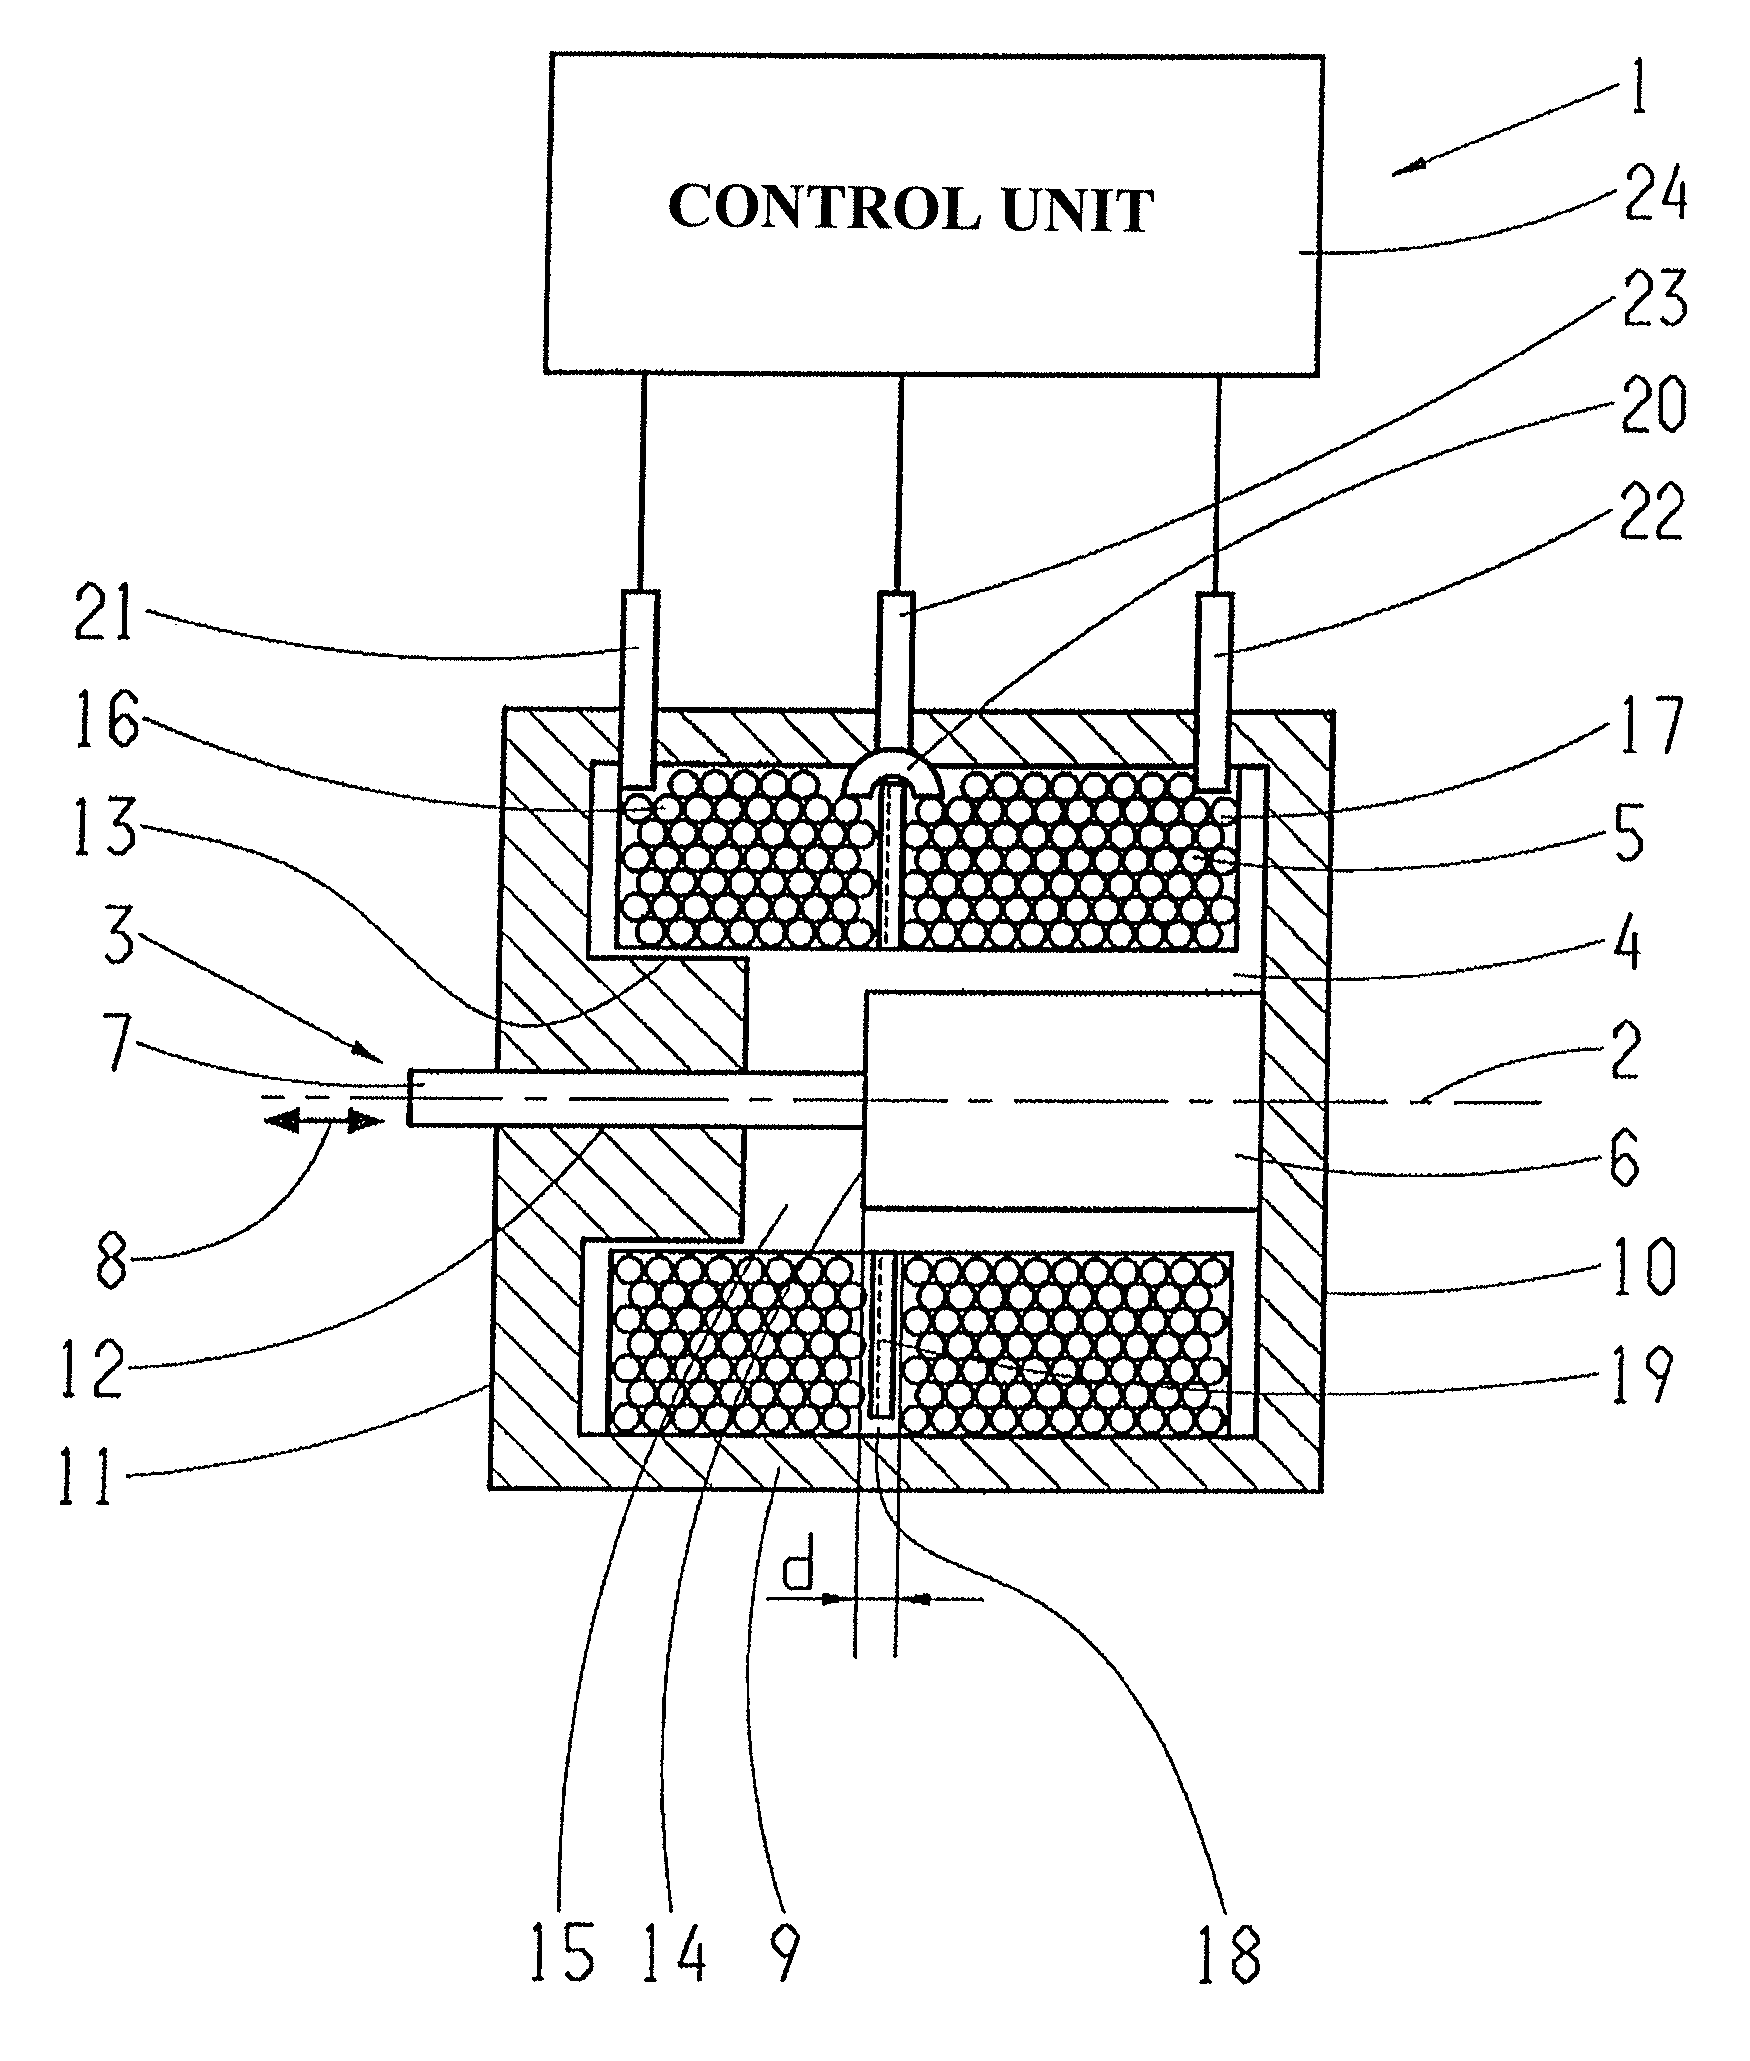 Electromagnetic actuating device with ability for position detection of an armature